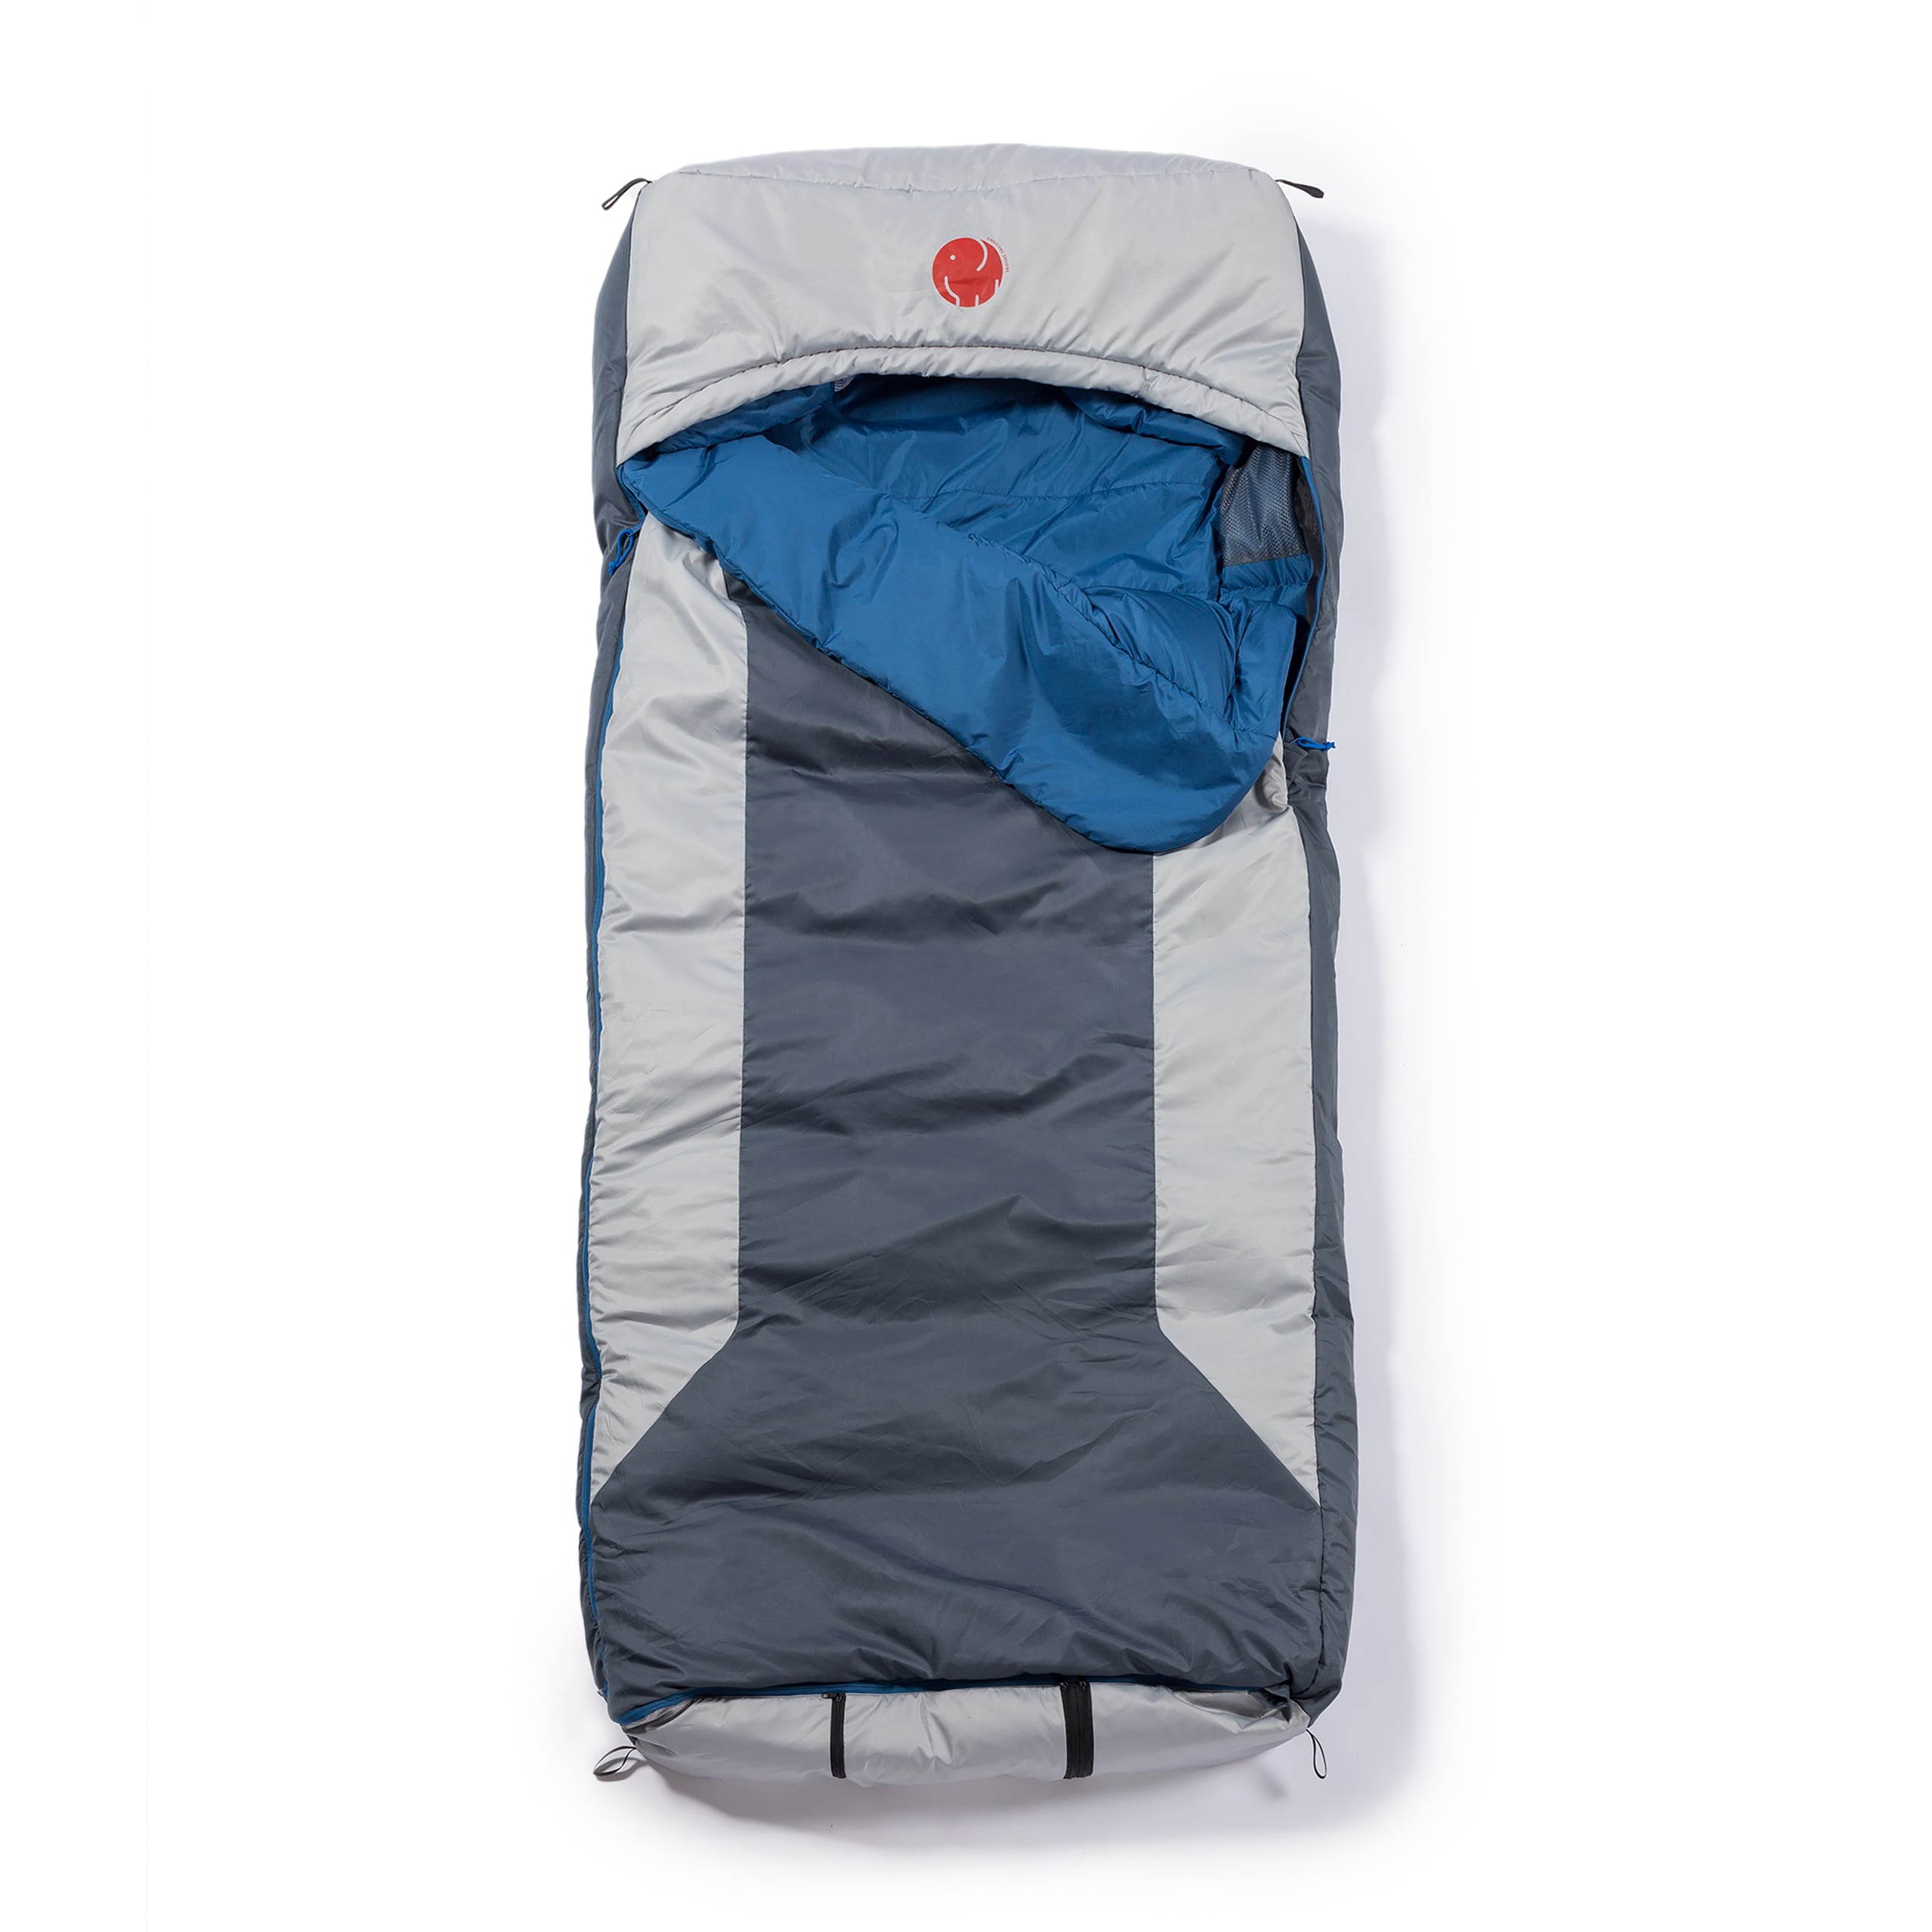 OmniCore Designs Travel and Camping Sheet Sleeping Bag Liner 